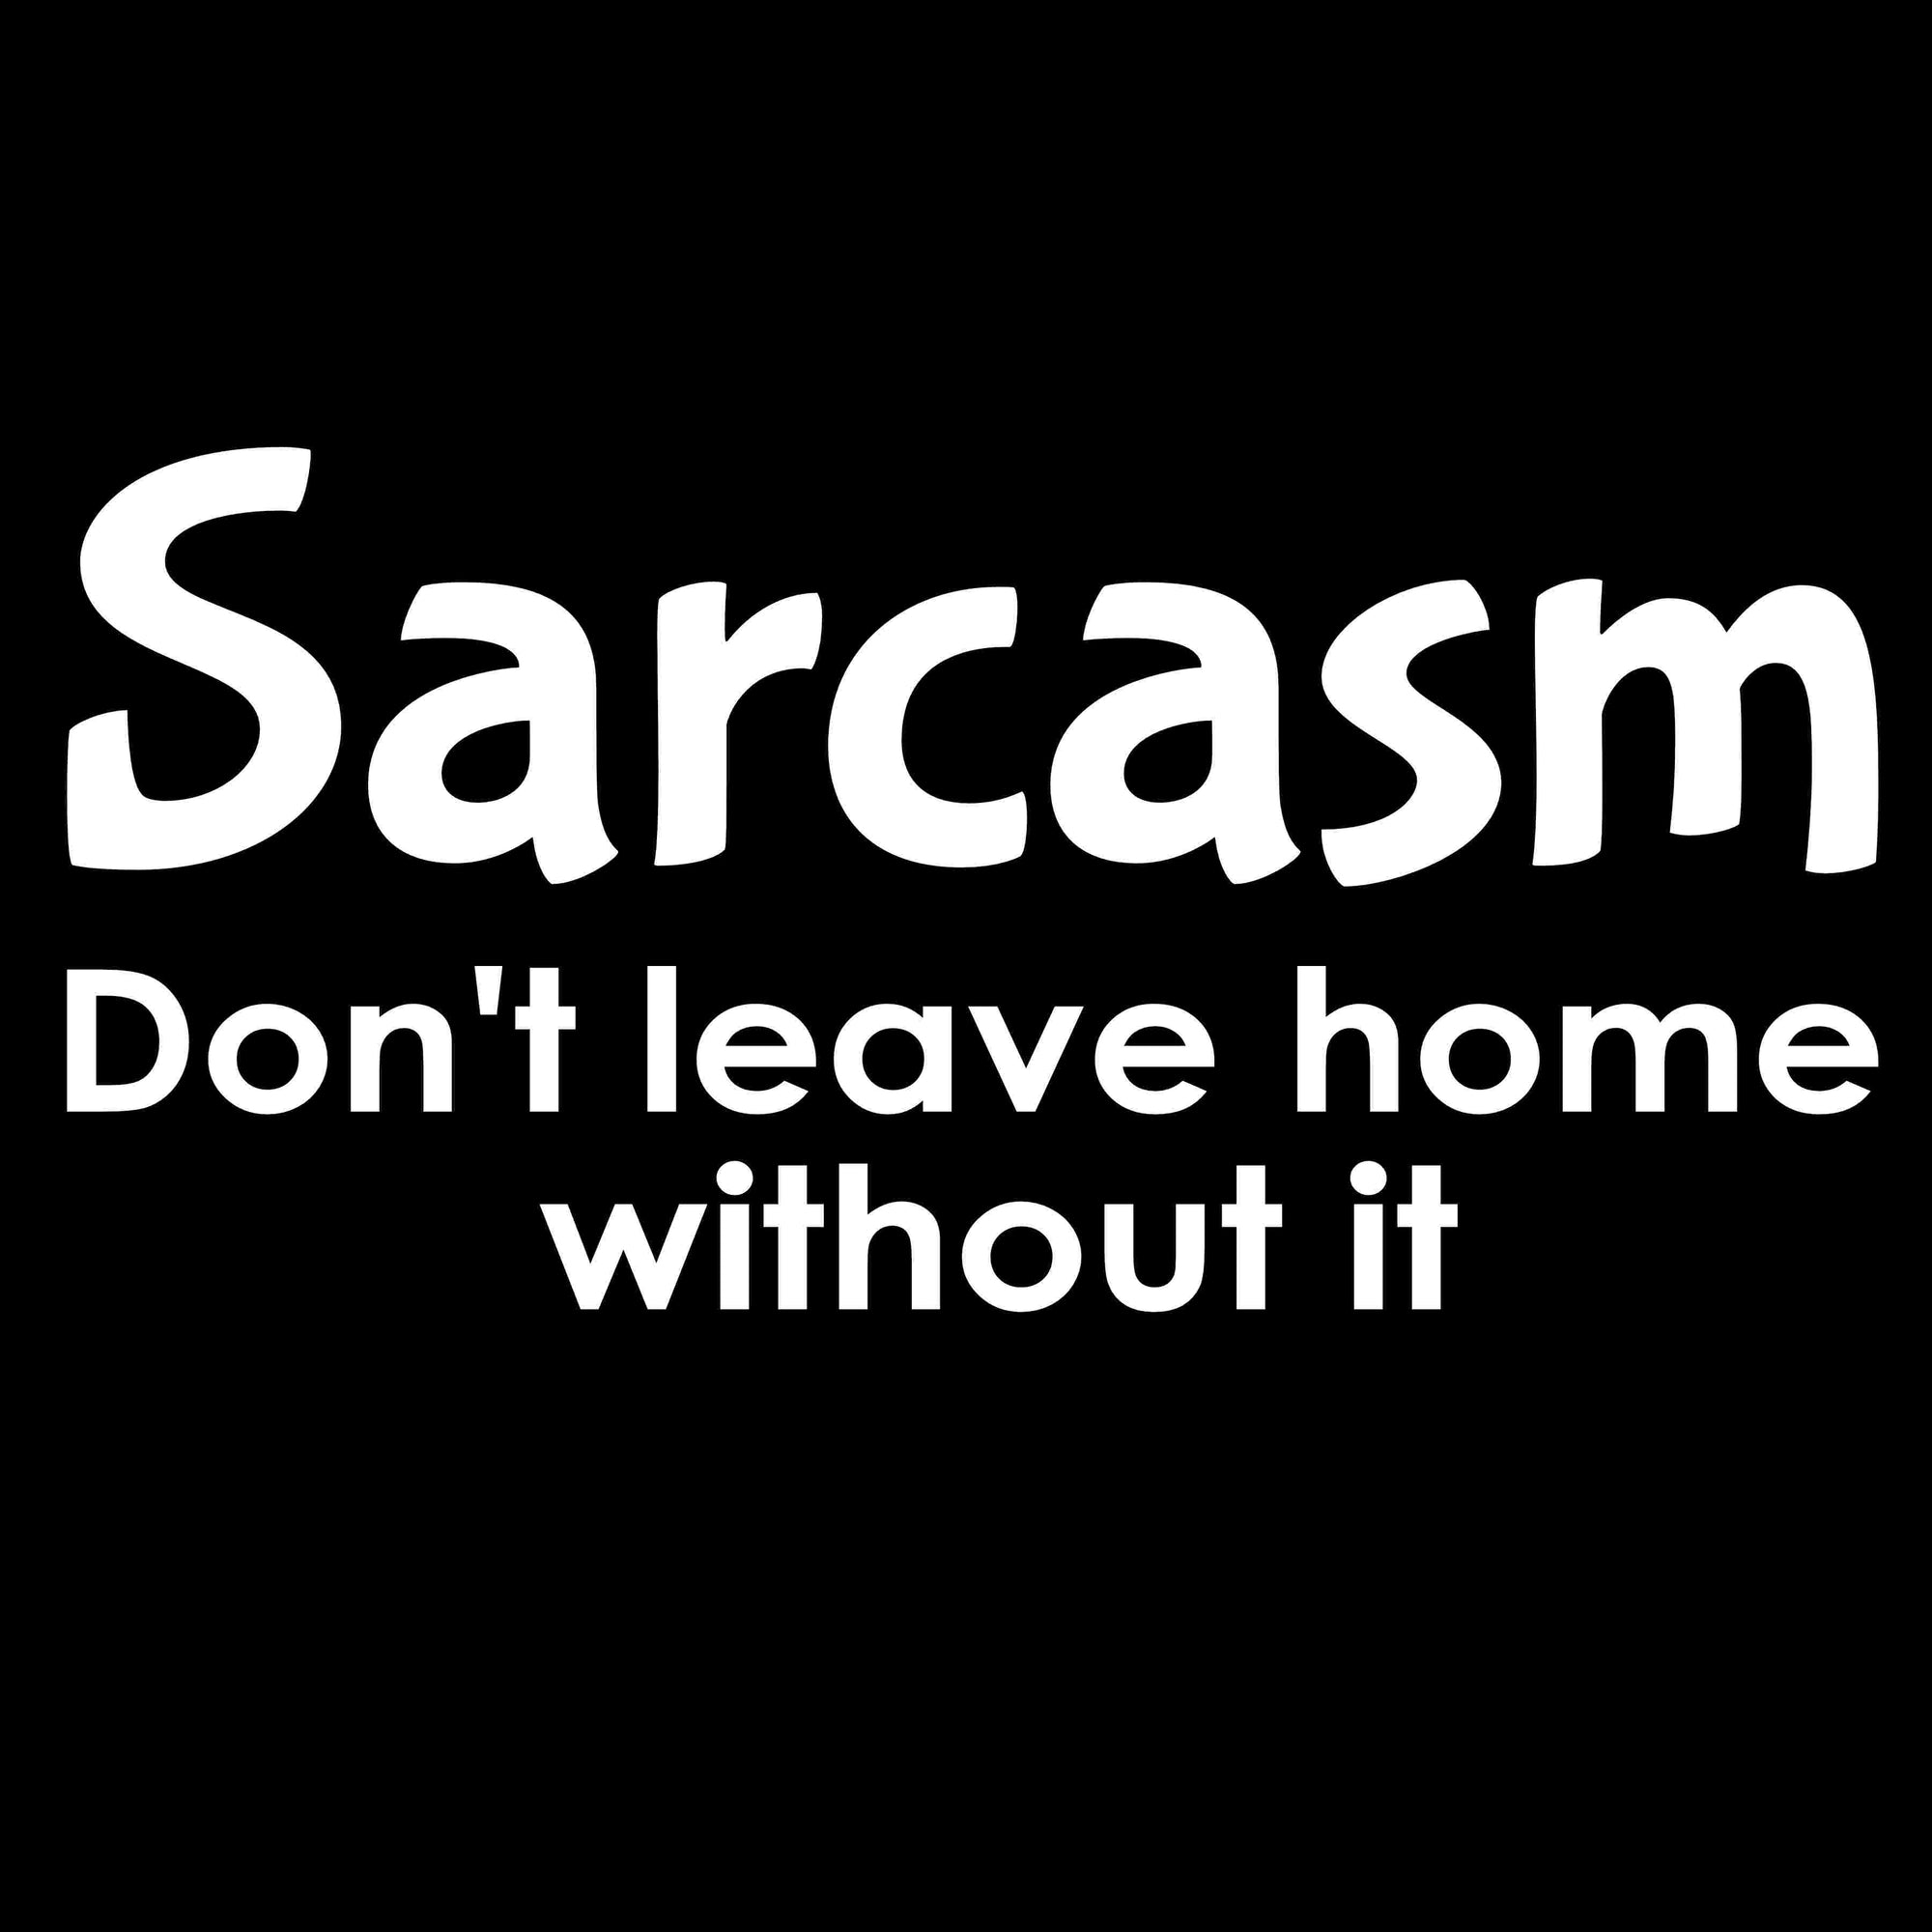 Sarcasm Don't Leave Home With Out Printed T-Shirt-Black